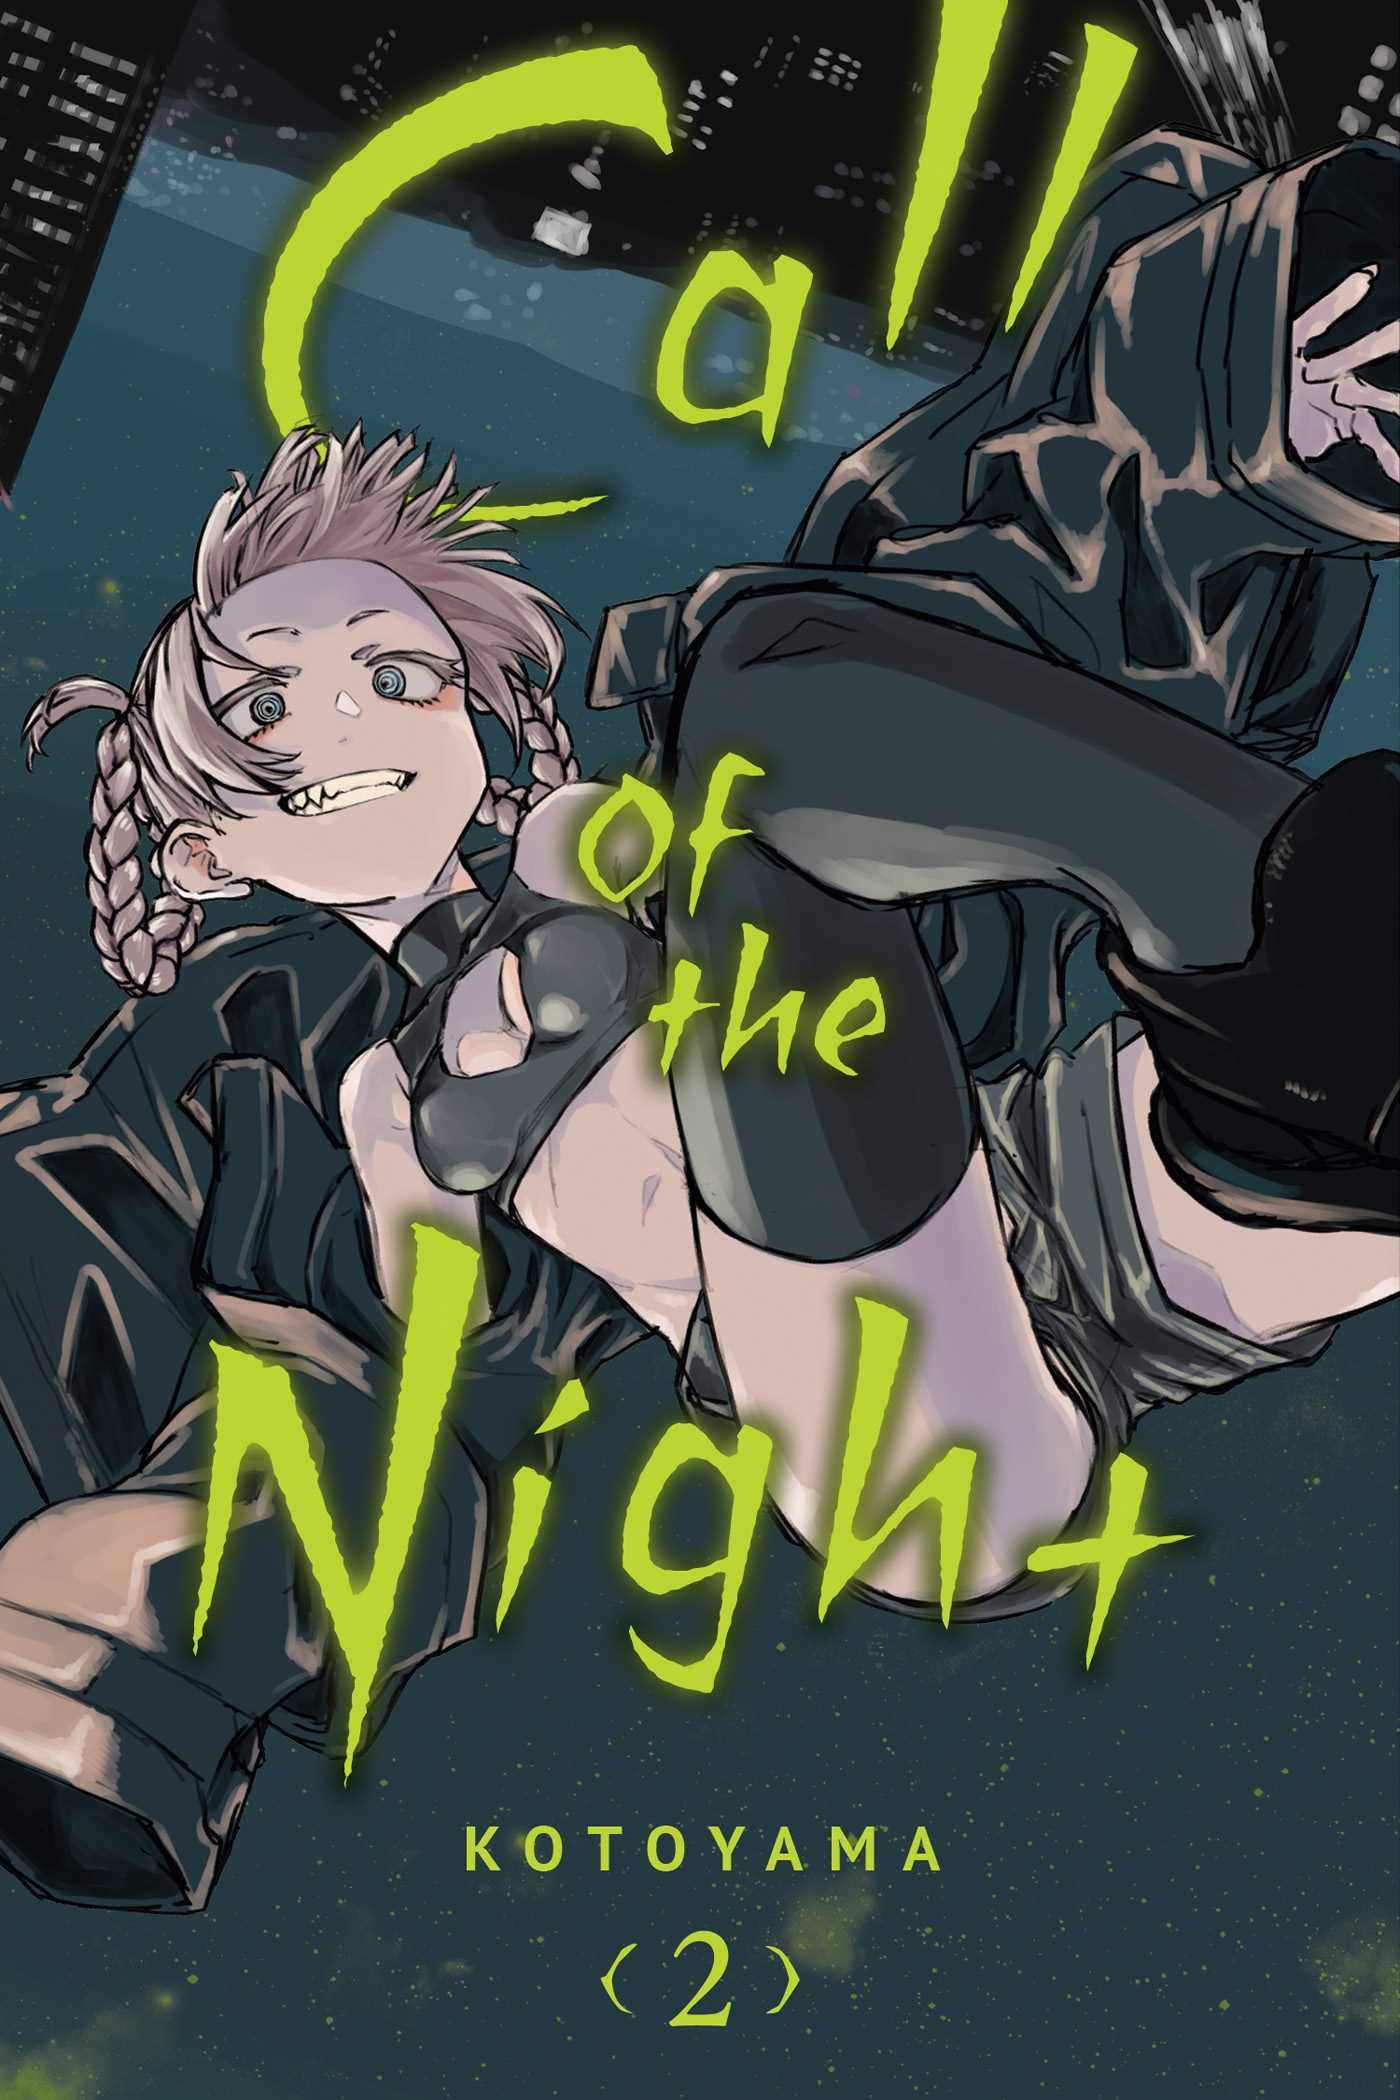 What to watch: Review of the anime Call of the Night